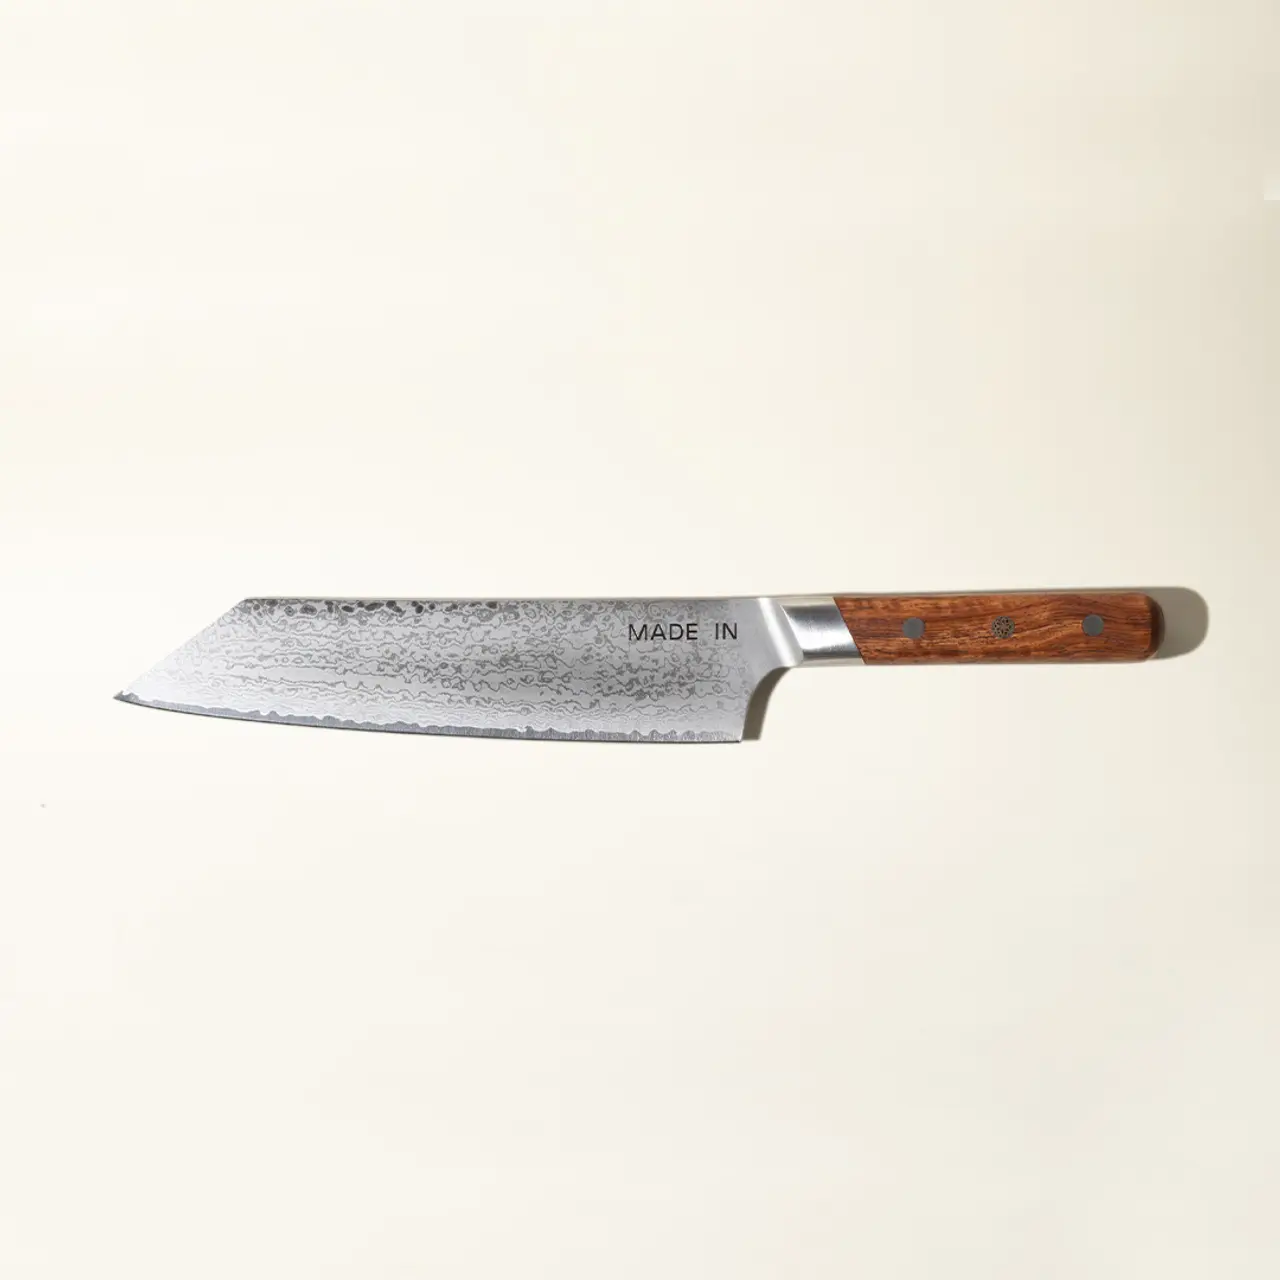 A Japanese chef's knife with a patterned blade and a wooden handle lies against a pale background.